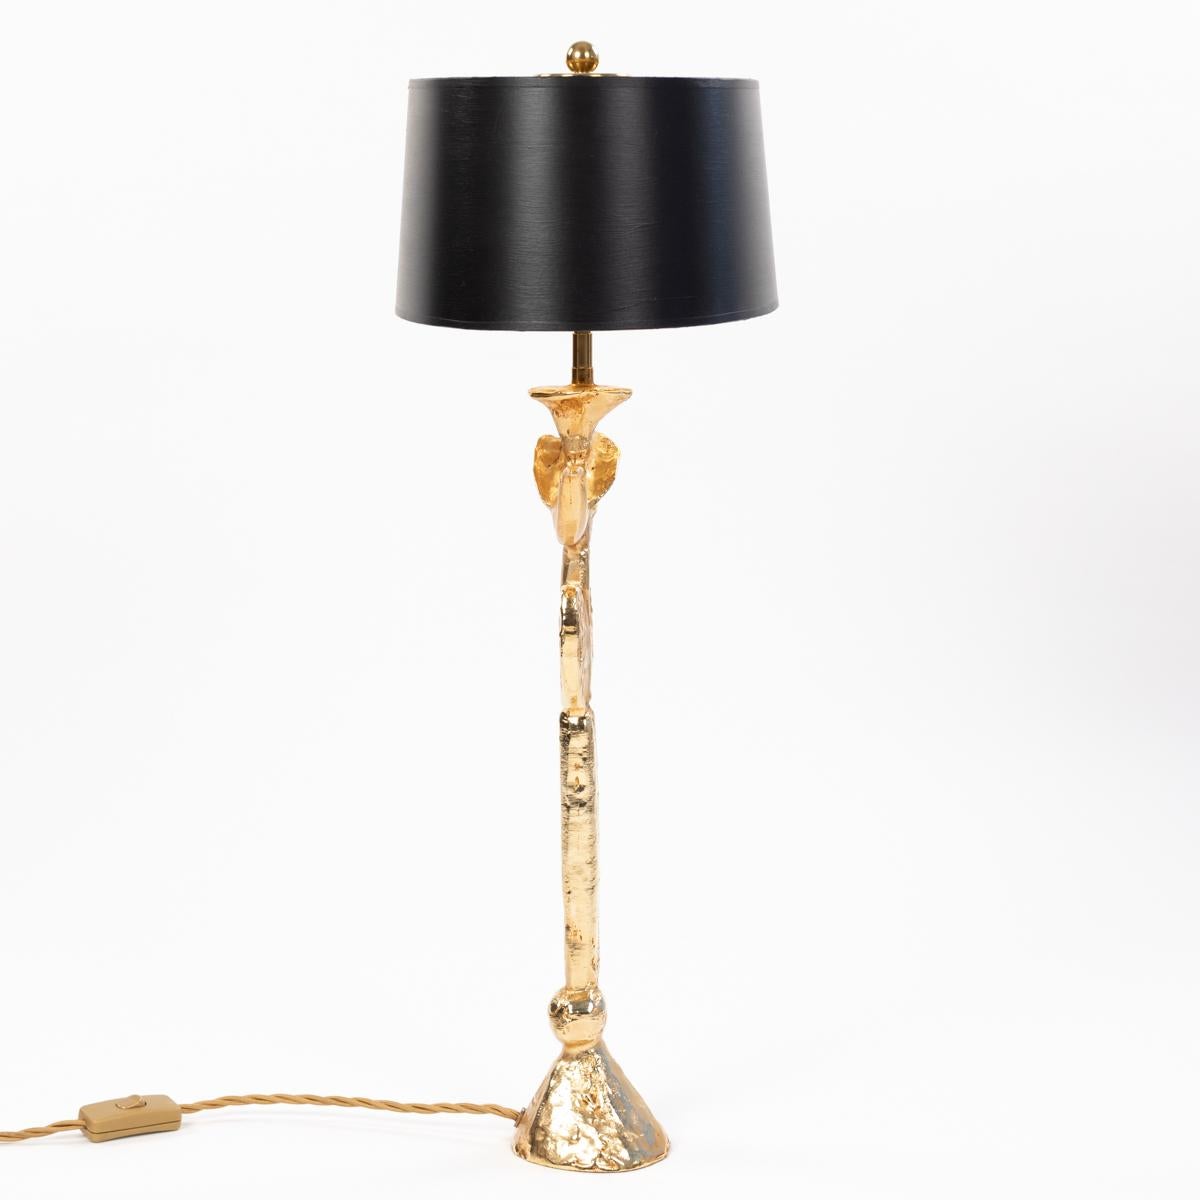 French Gilded Bronze Table Lamp by Pierre Casenove for Fondica, 1980s In Excellent Condition For Sale In Salzburg, AT